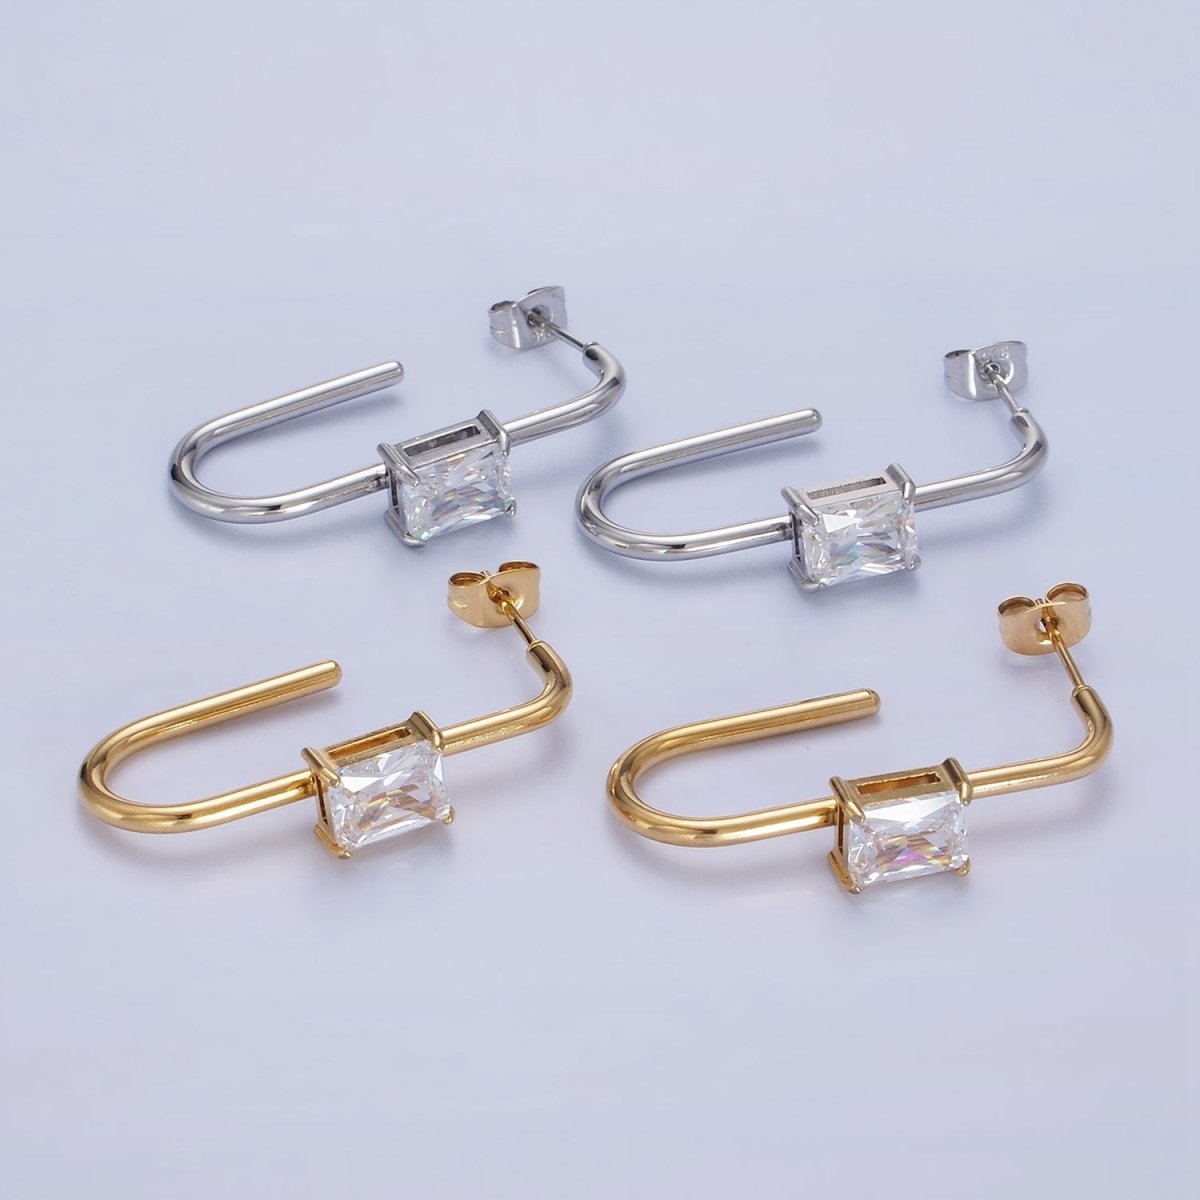 Stainless Steel 35mm Baguette J-Shaped Earrings in Gold & Silver | AB1382 AB1383 - DLUXCA